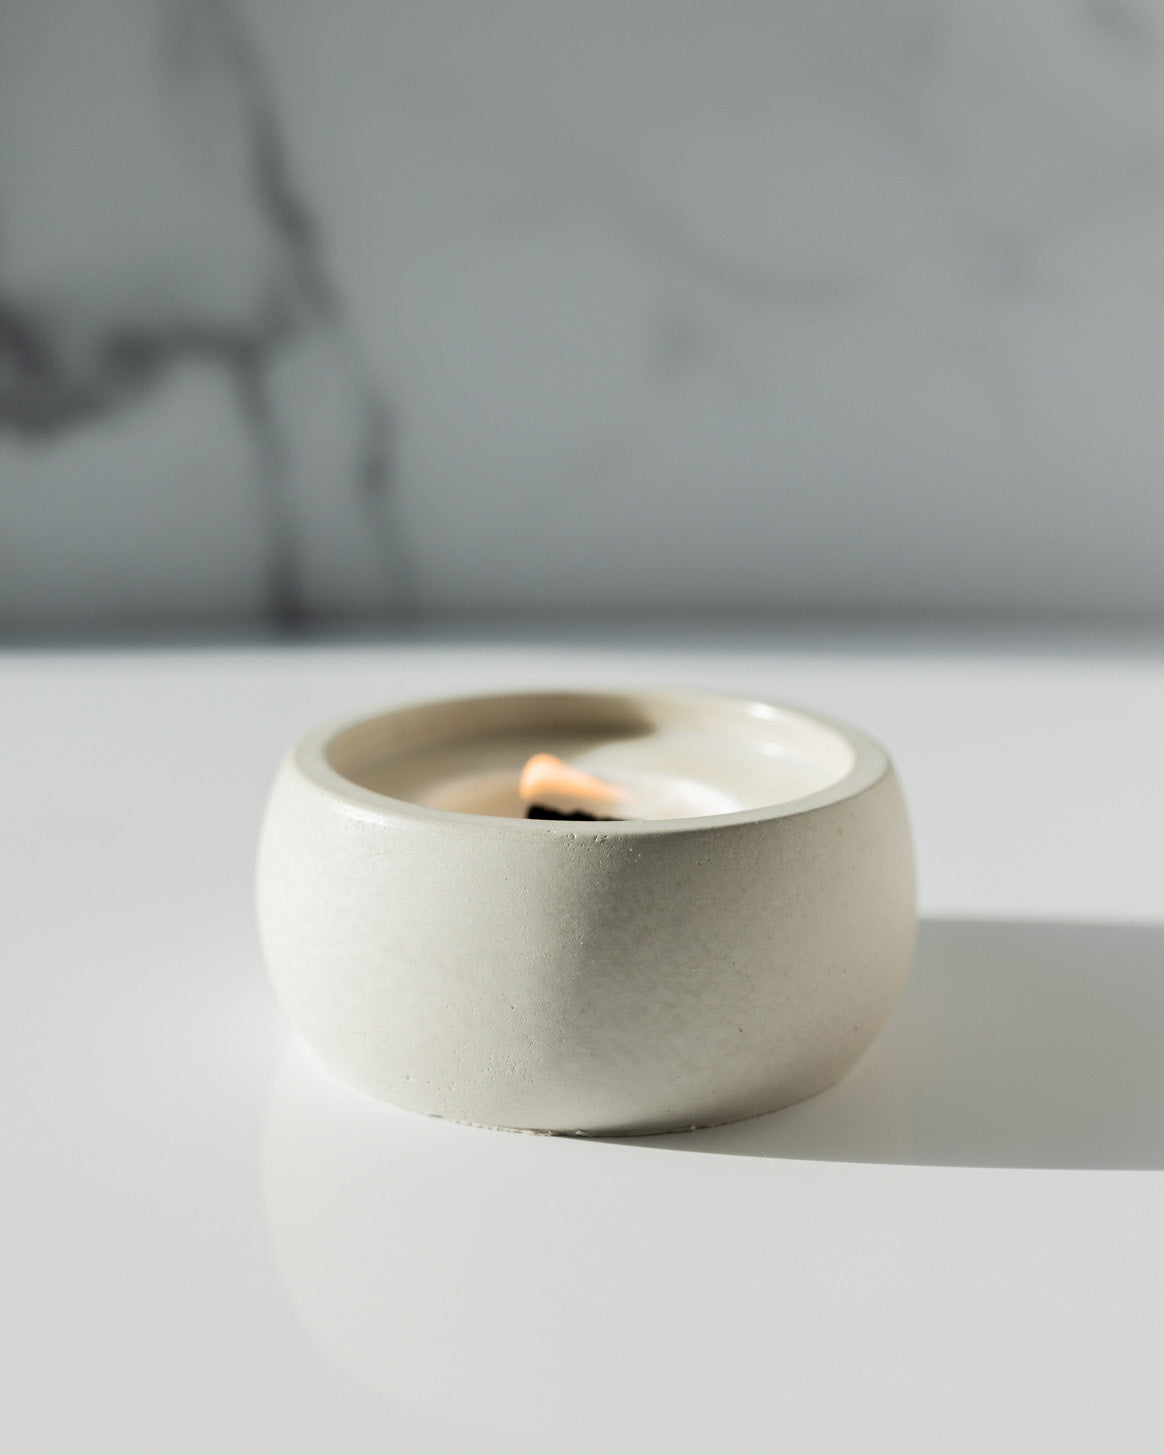 Spruce It Up Coconut Soy Candle - Concrete Wooden Wick Vessel